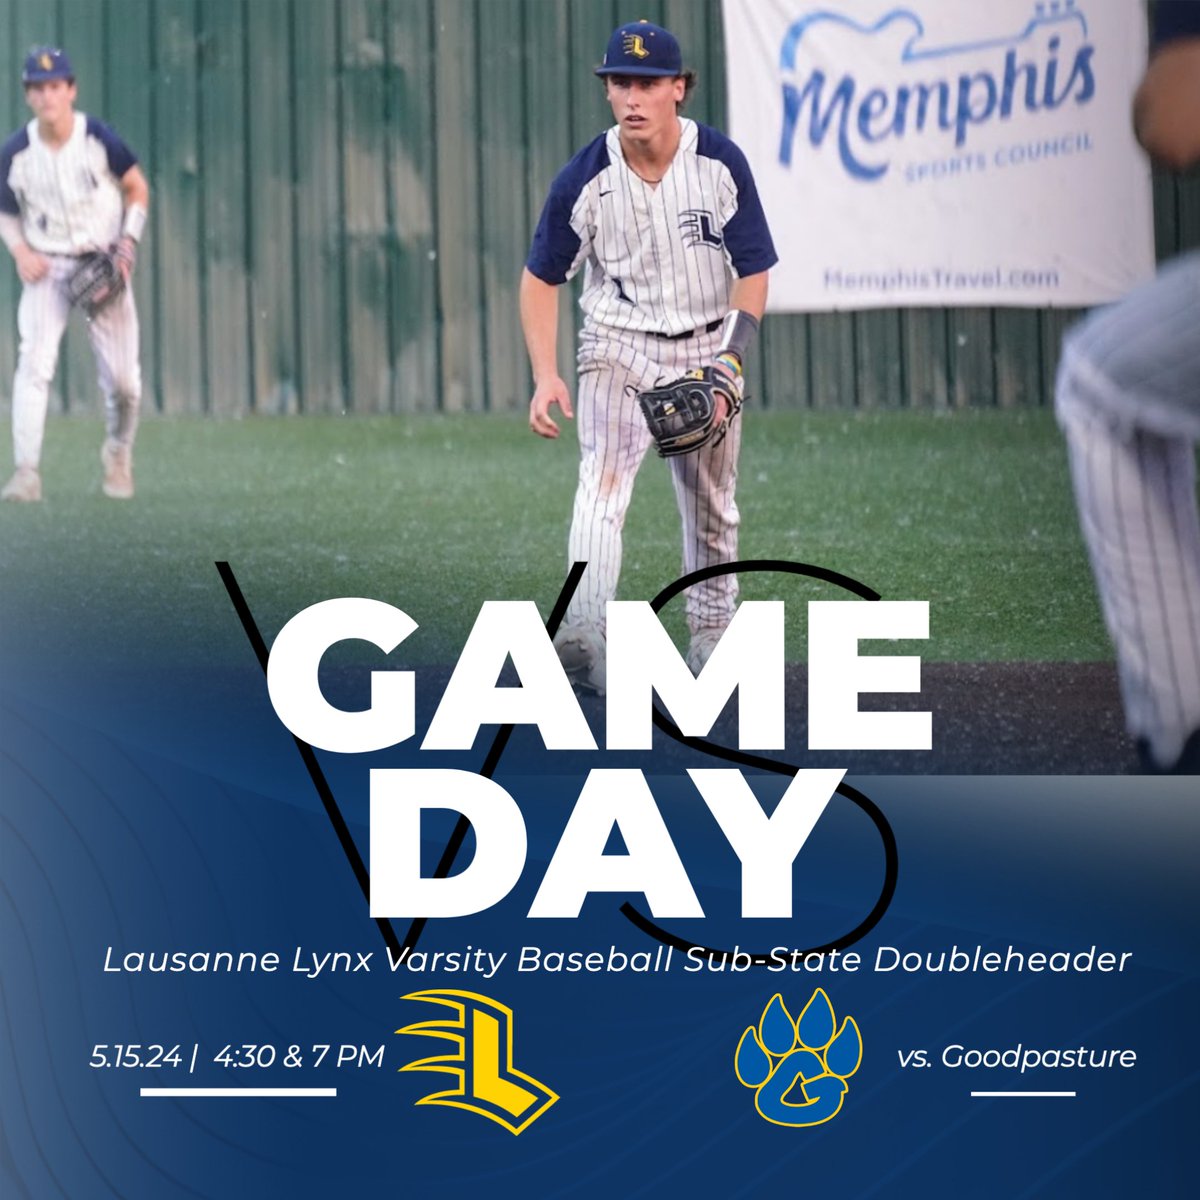 Game Day! Baseball is in sub-state action tonight at Gagliano against Goodpasture. Bonus: It's a doubleheader! #LetsGoLynx #BeGreat